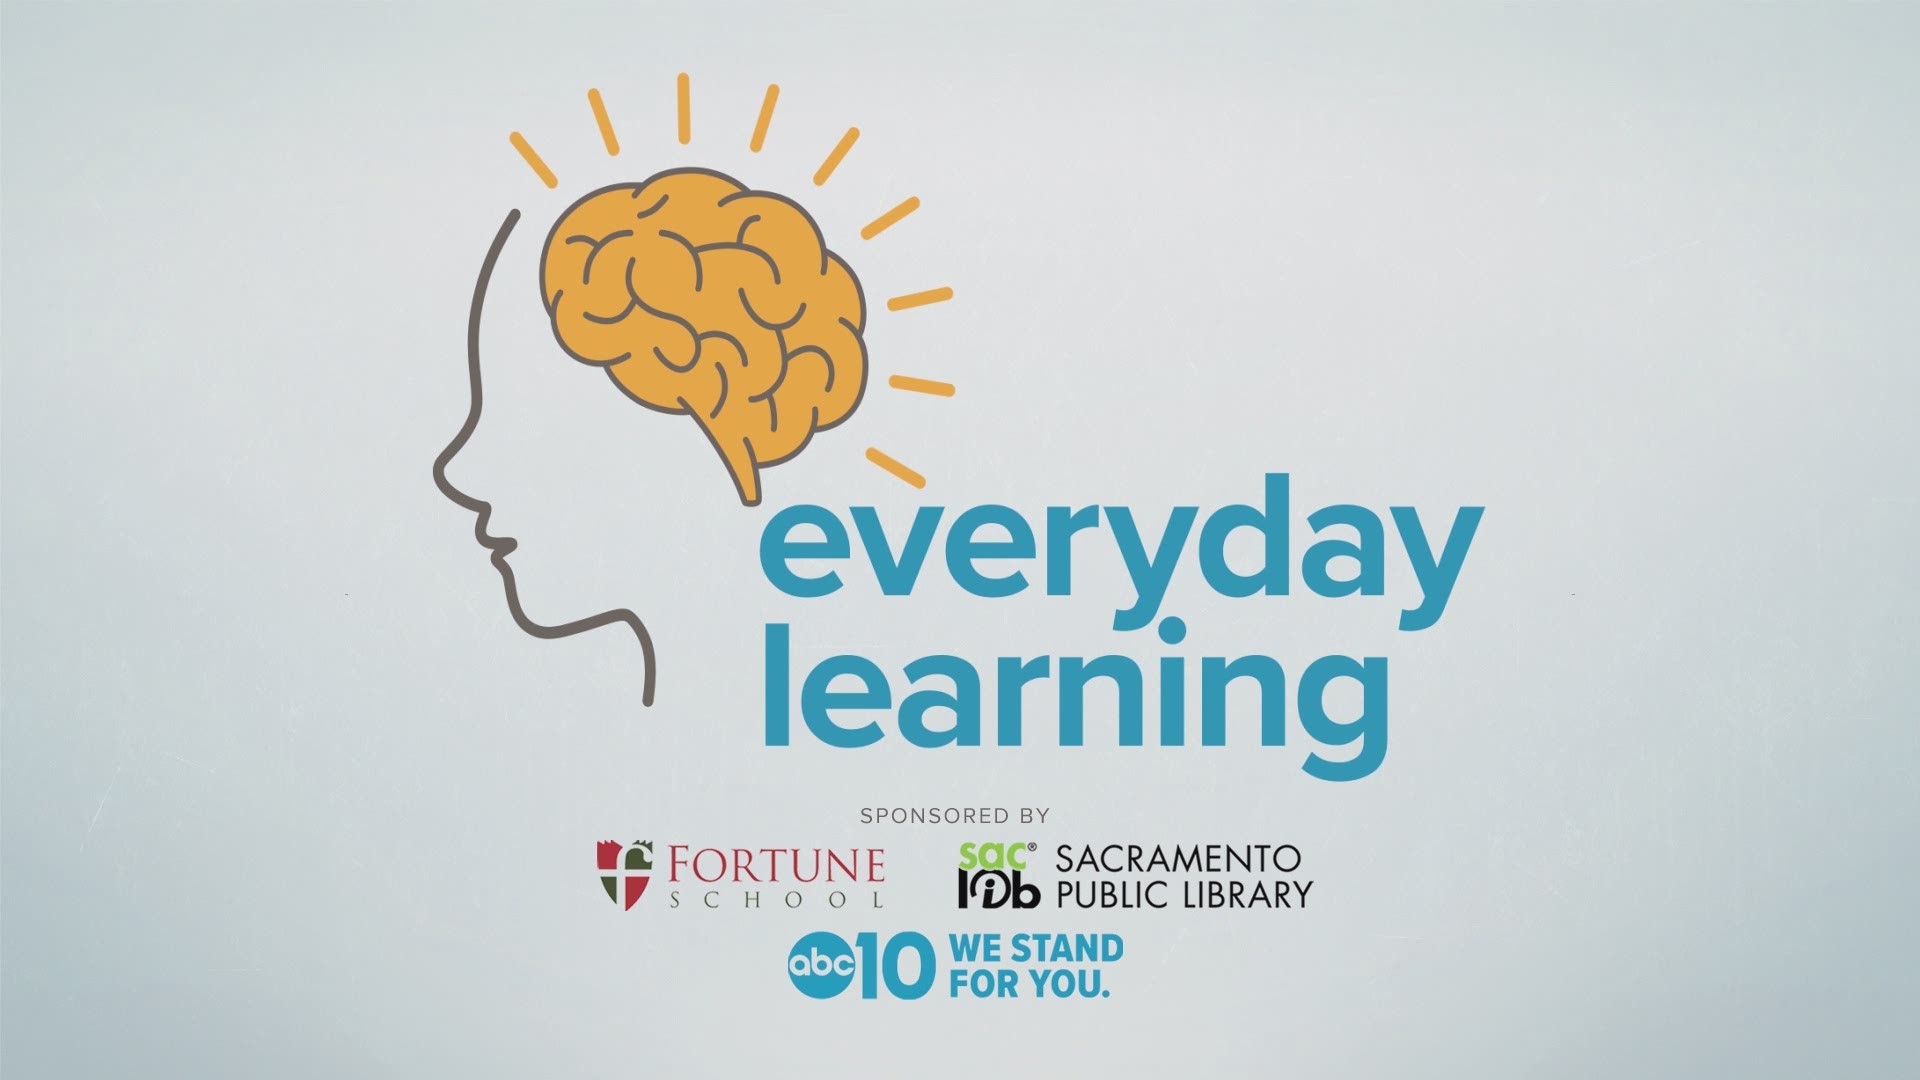 Everyday Learning: Sacramento Public Library providing online tutoring.   More learning tips are at https://www.abc10.com/everydaylearning